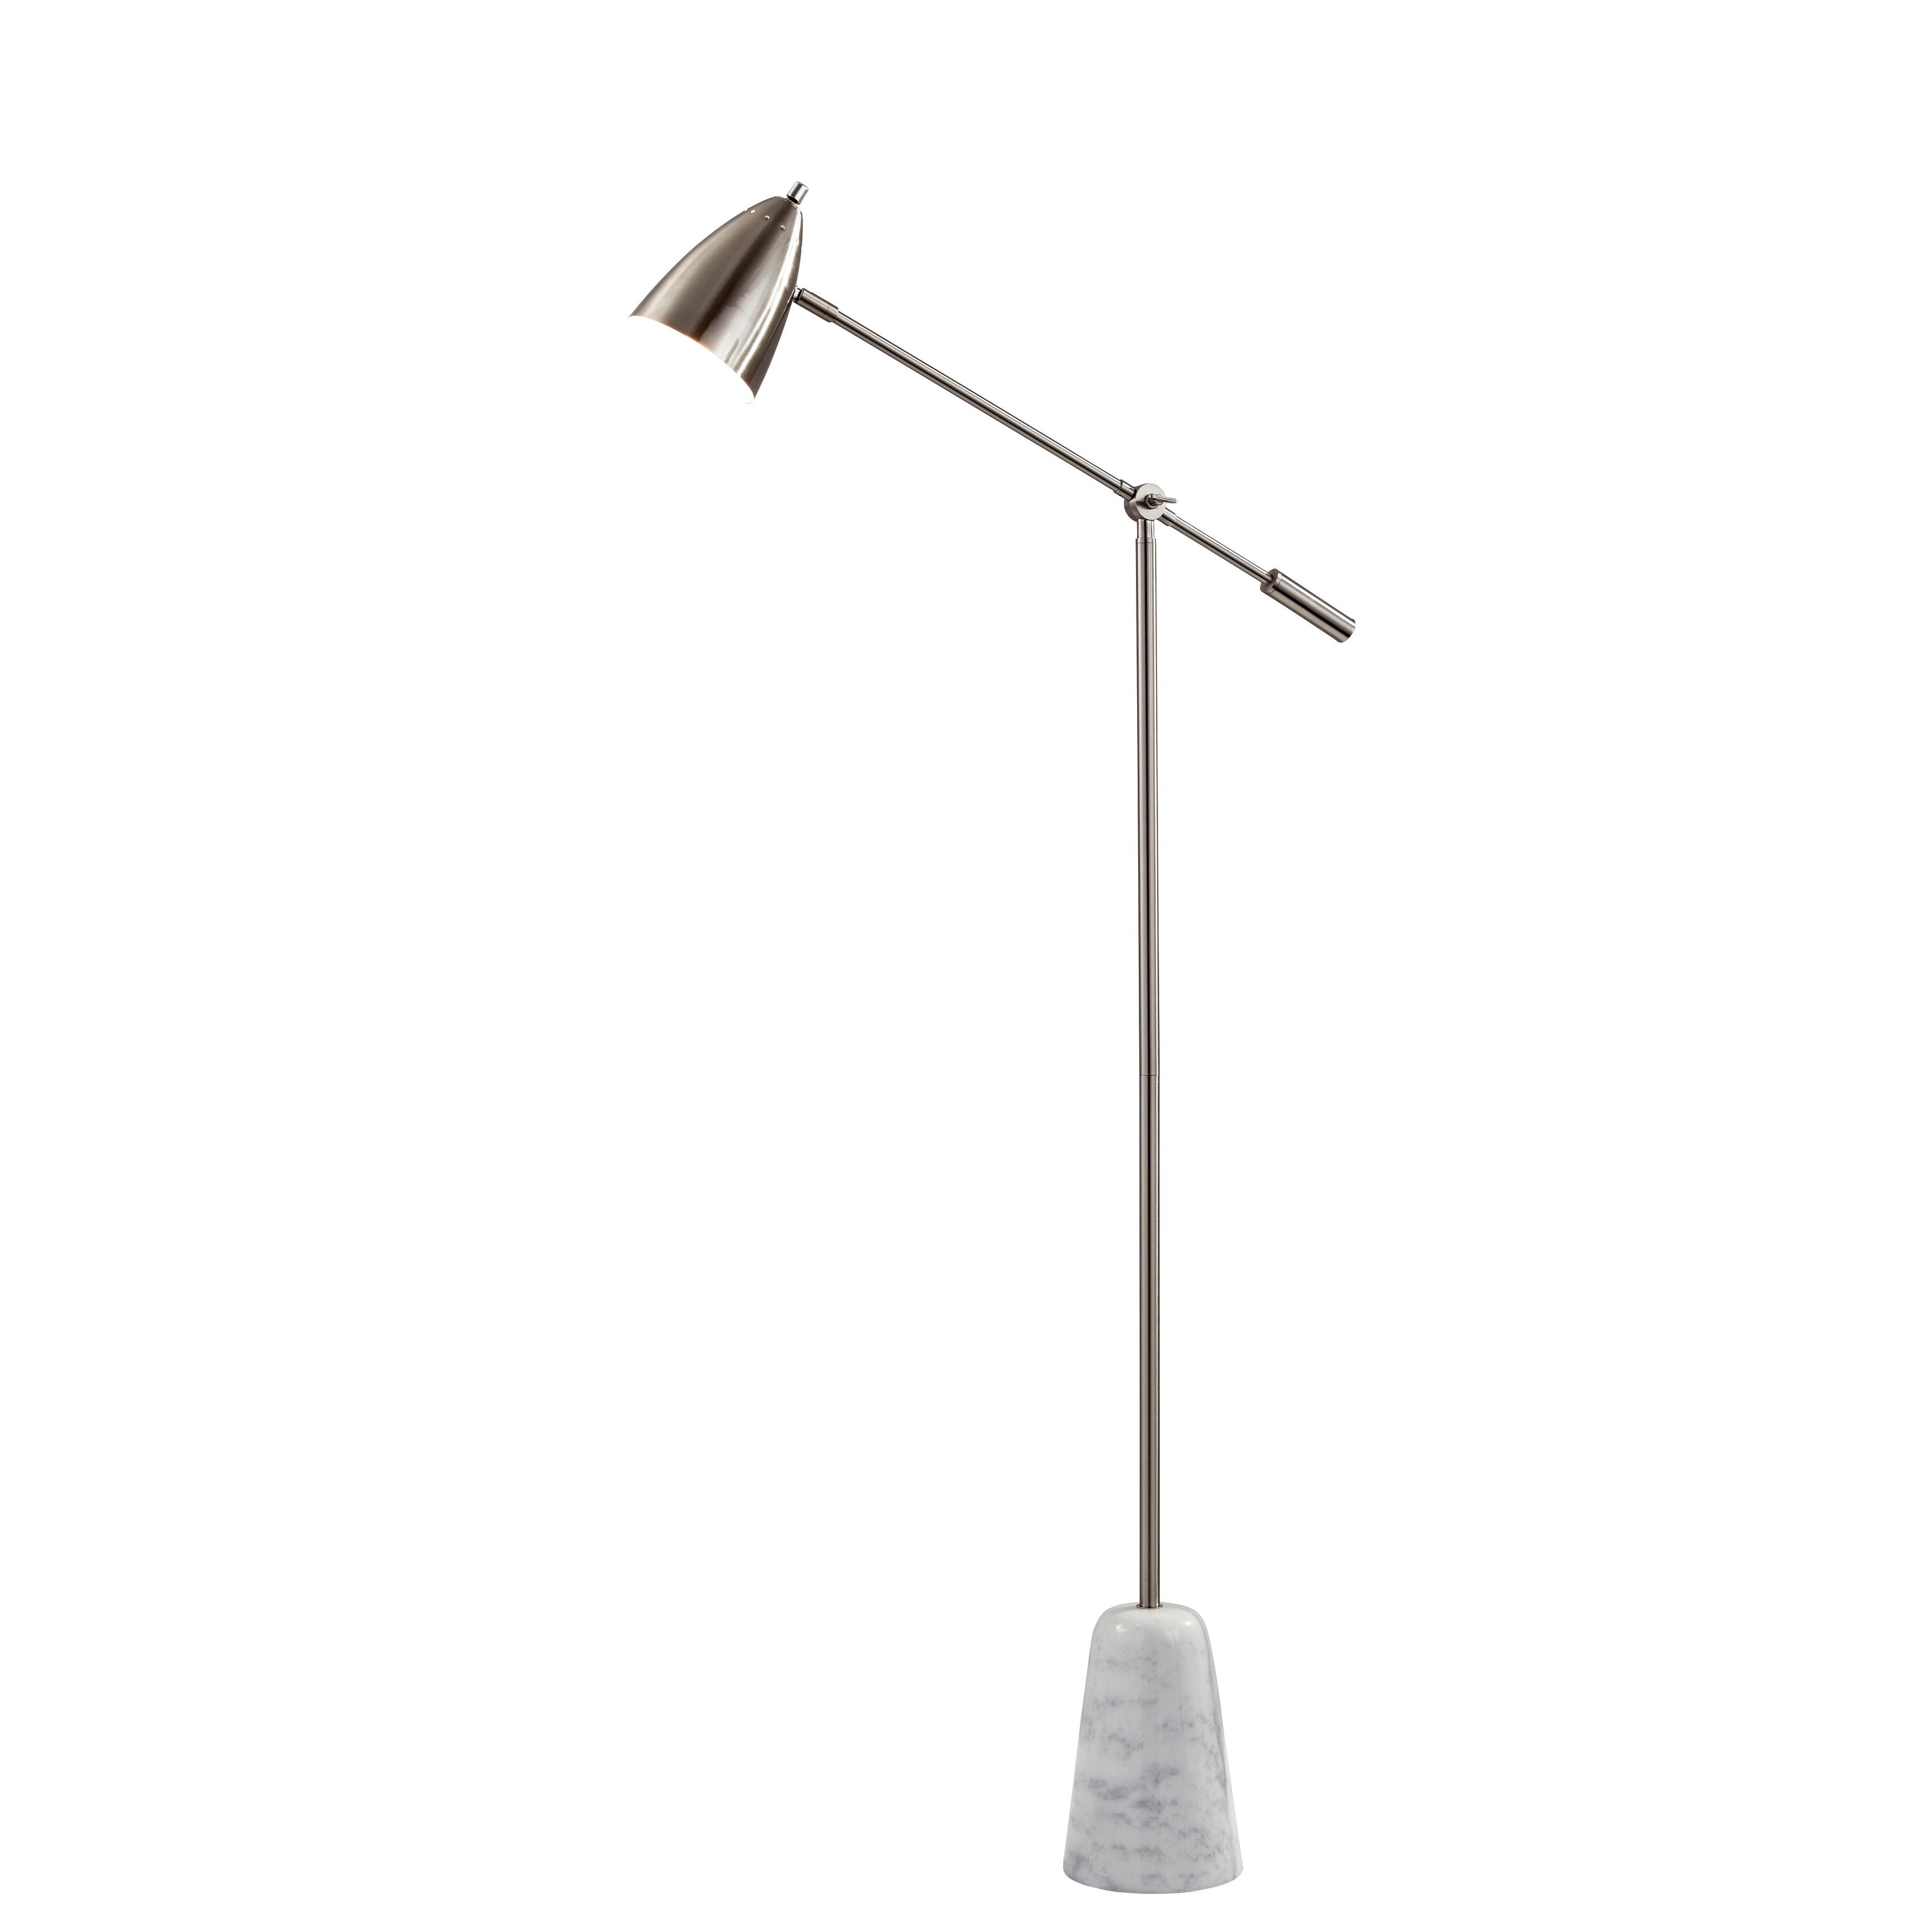 Strick Bolton Shera Brushed Steel Boom Arm Floor Lamp with regard to measurements 3500 X 3500